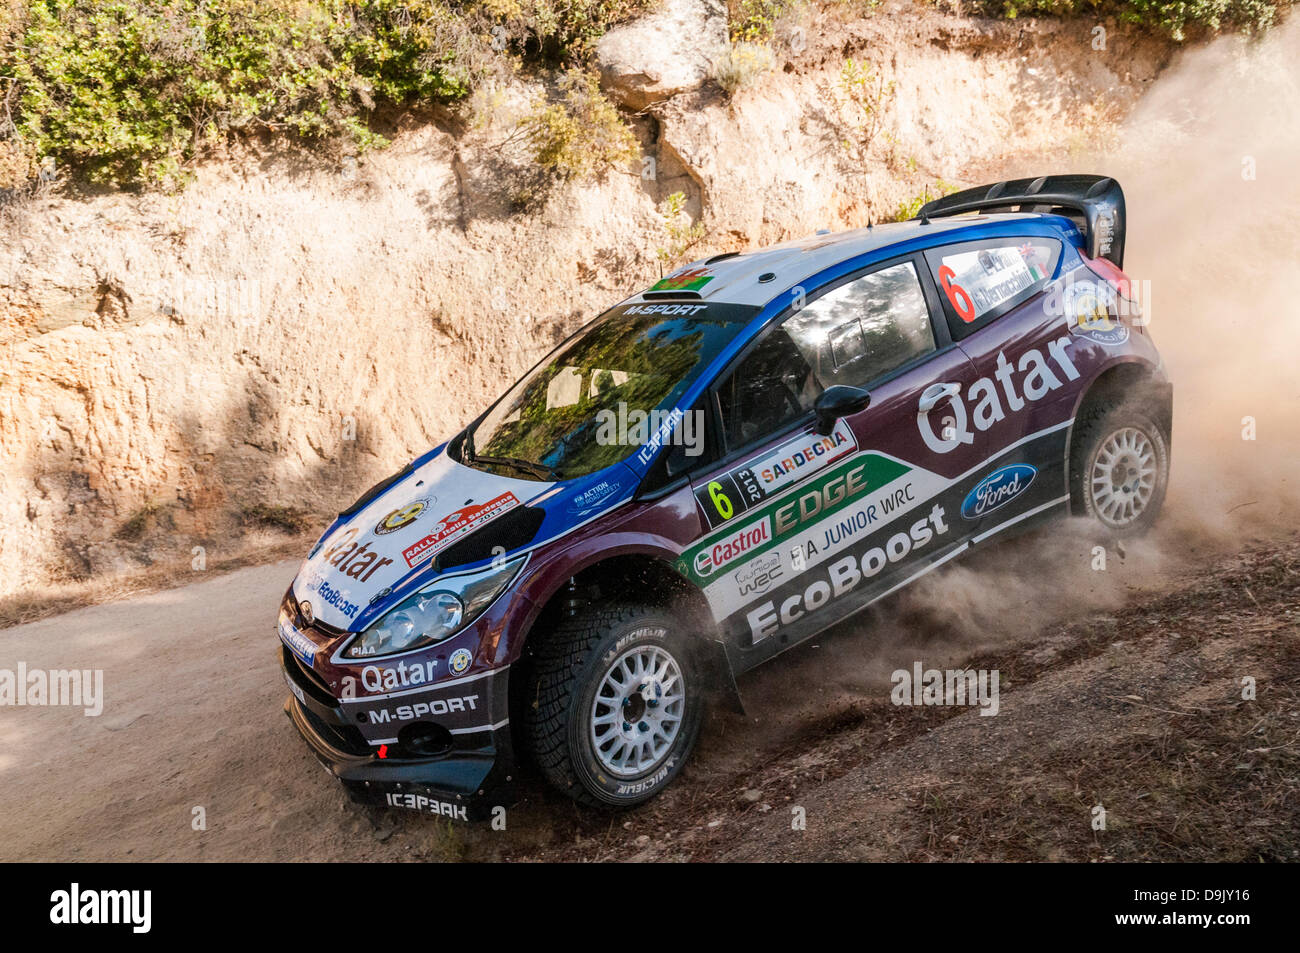 Olbia, Italy. 20th June, 2013. Sardinia Rally, valid as the Italian stage of FIA World Rally Championship. Day 1. Qualifyng stage 'Monte Pinu';. Qatar team - Ford Fiesta RS WRC. Evans / Bernacchini. Credit: Action Plus Sports/Alamy Live News Stock Photo